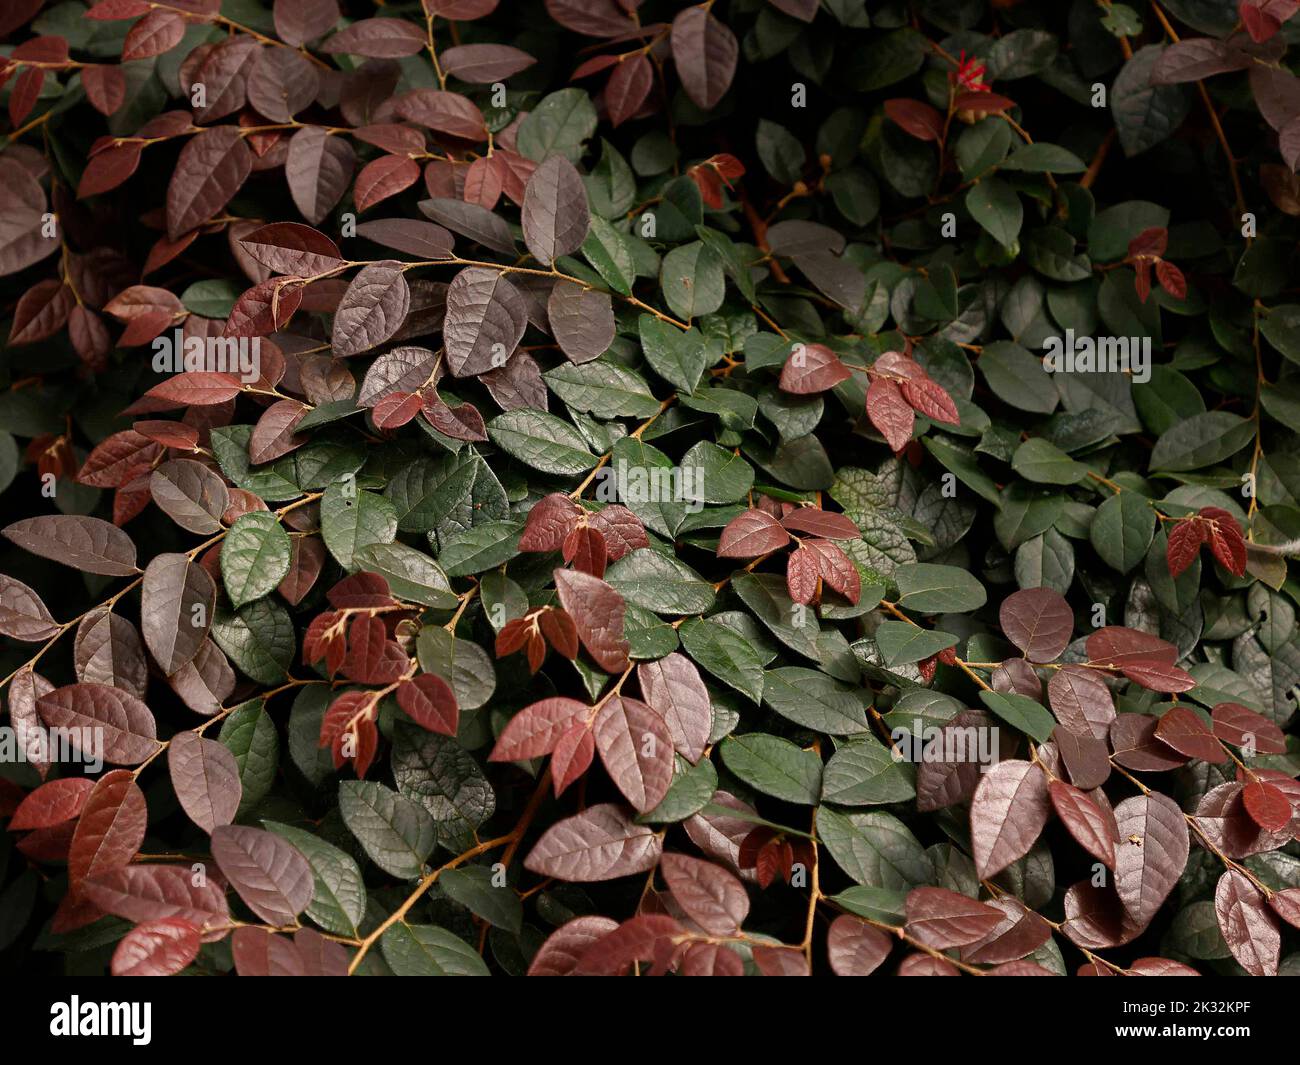 Close up of the semi-evergreen garden shrub Loropetalum chinense rubrum Blush with reddish-purple young leaves seen in late September. Stock Photo